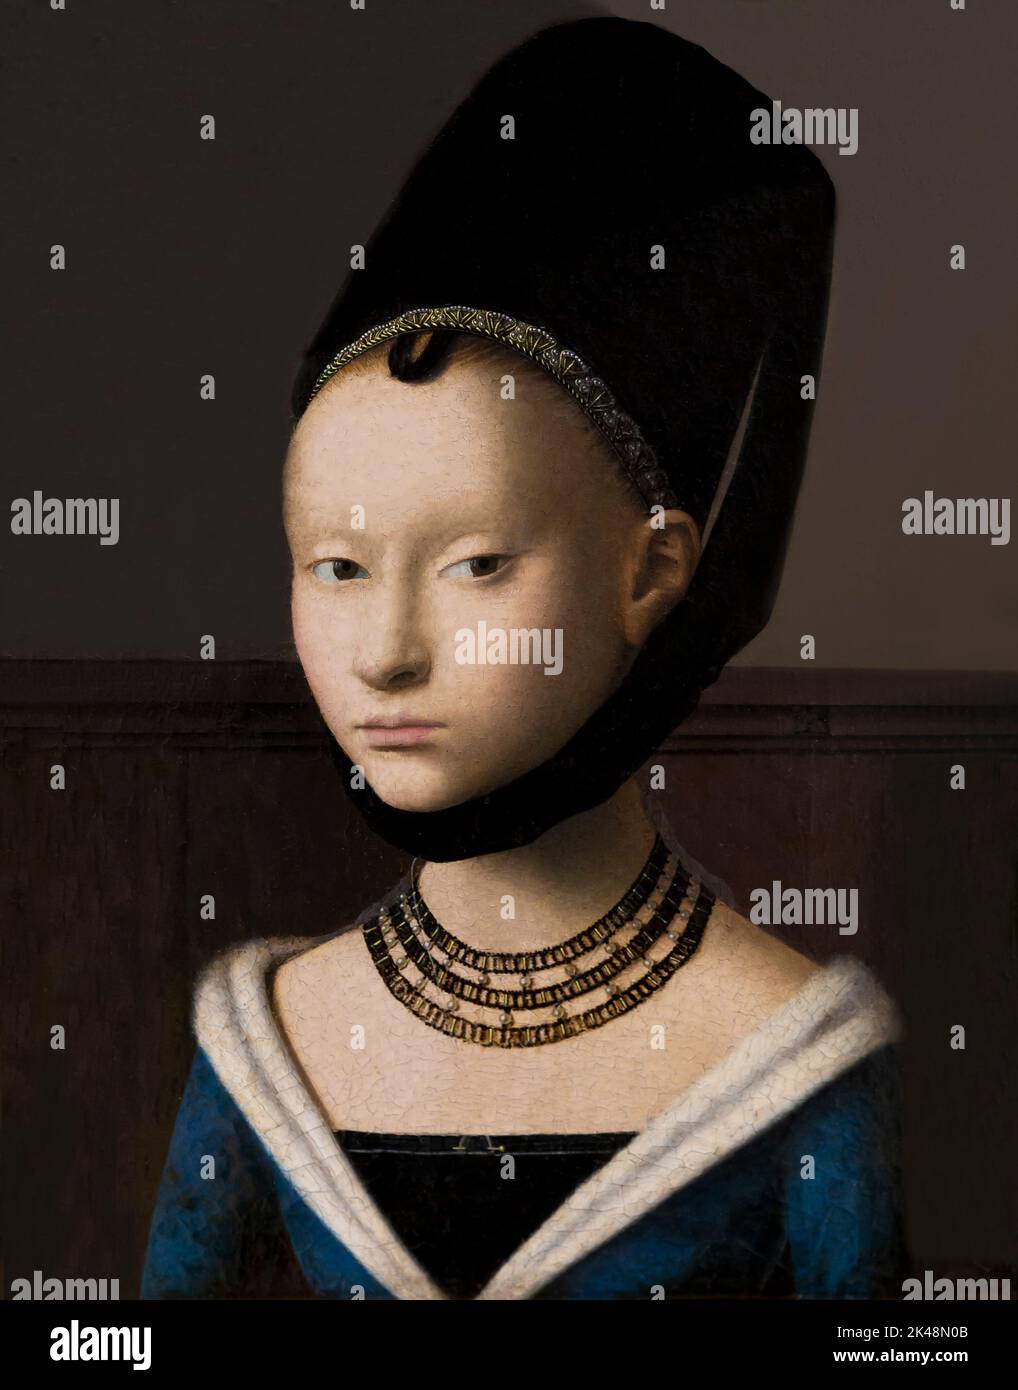 Portrait of a Young Lady, Petrus Christus, circa 1470, Gemaldegalerie, Berlin, Germany, Europe Stock Photo